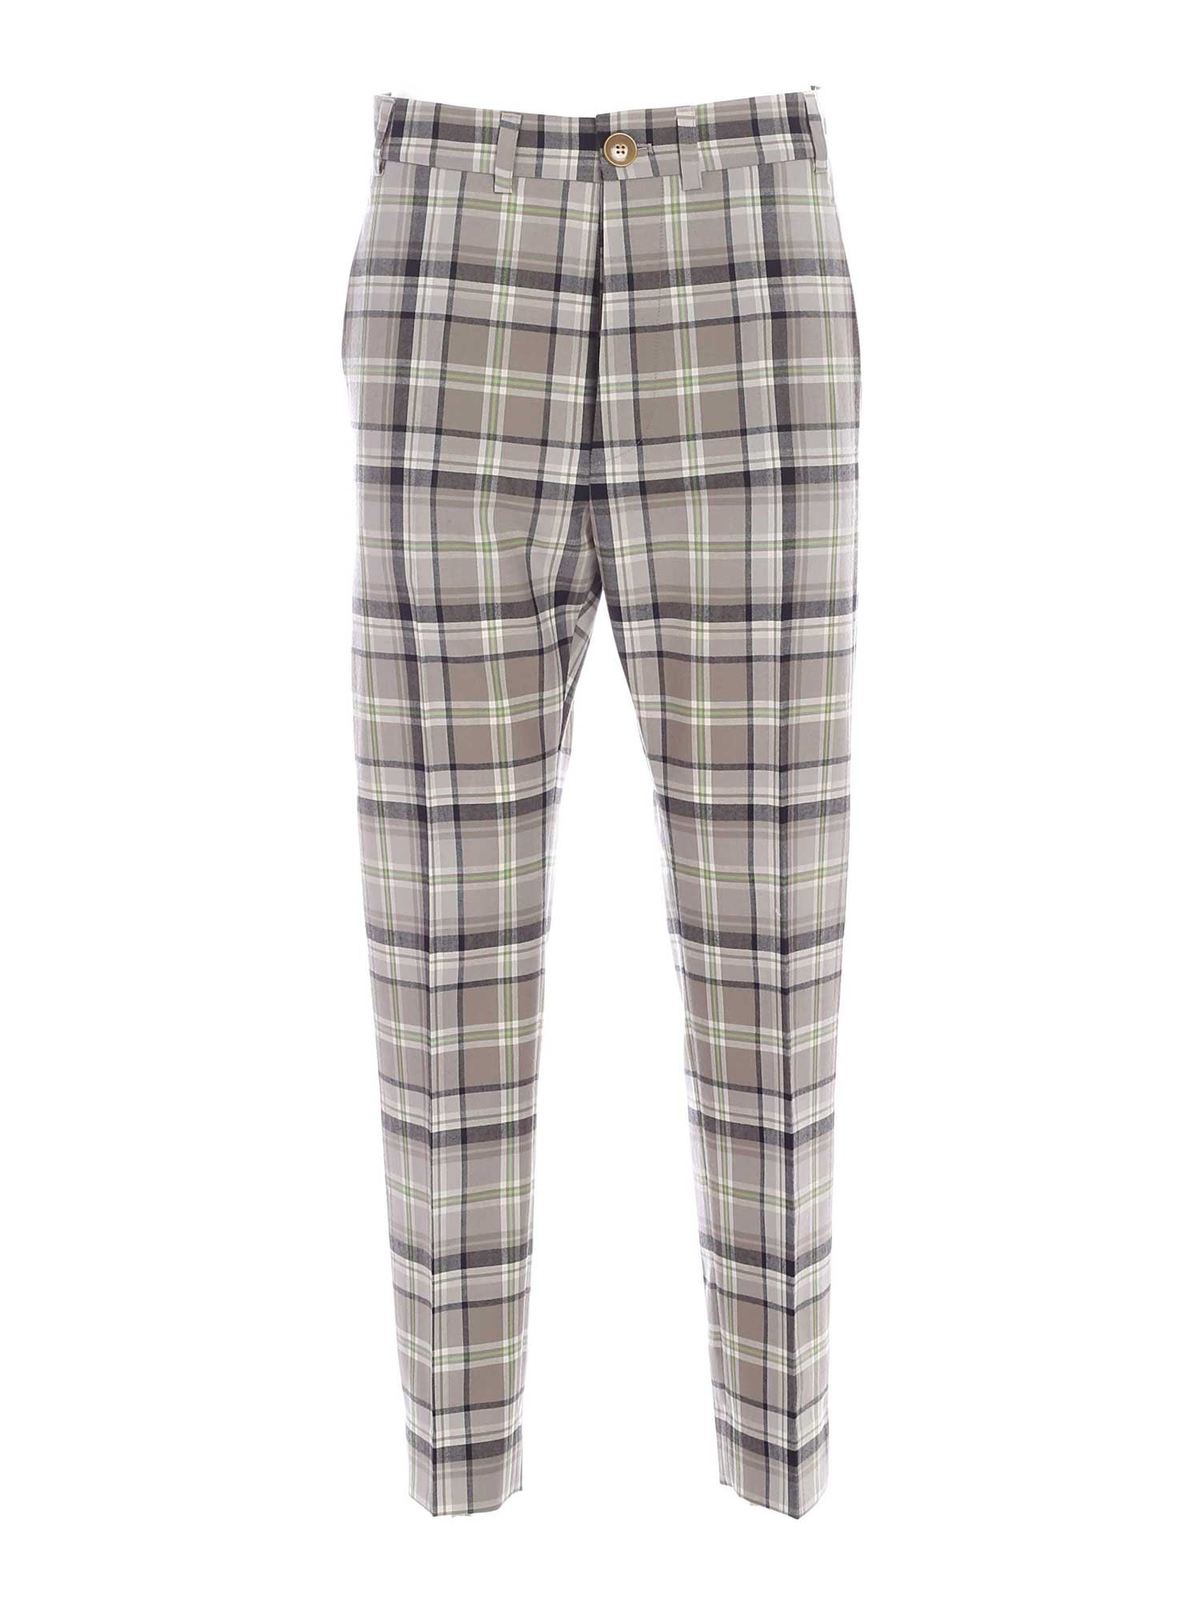 Vivienne Westwood Check Pants In Gray And Green In Gris